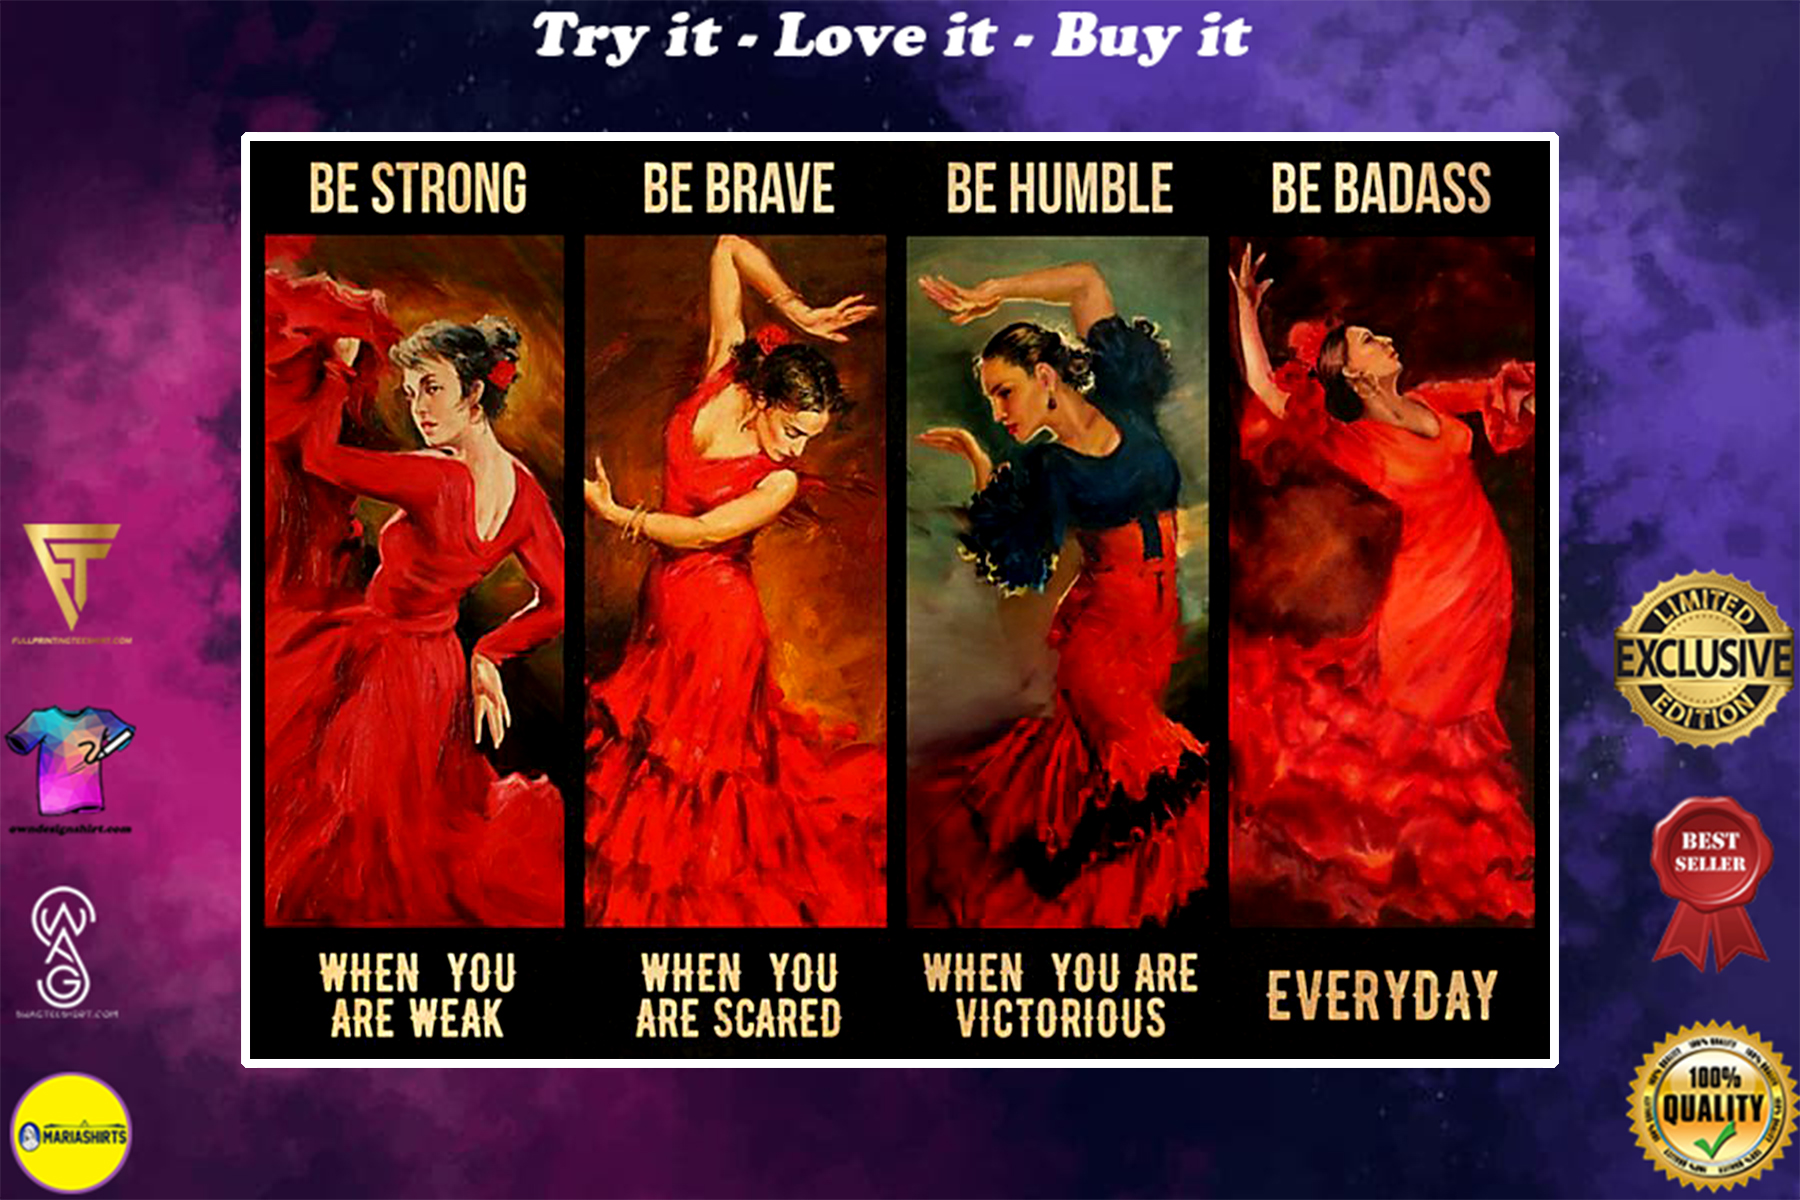 vintage girl latin dance be strong when you are weak be brave when you are scared poster